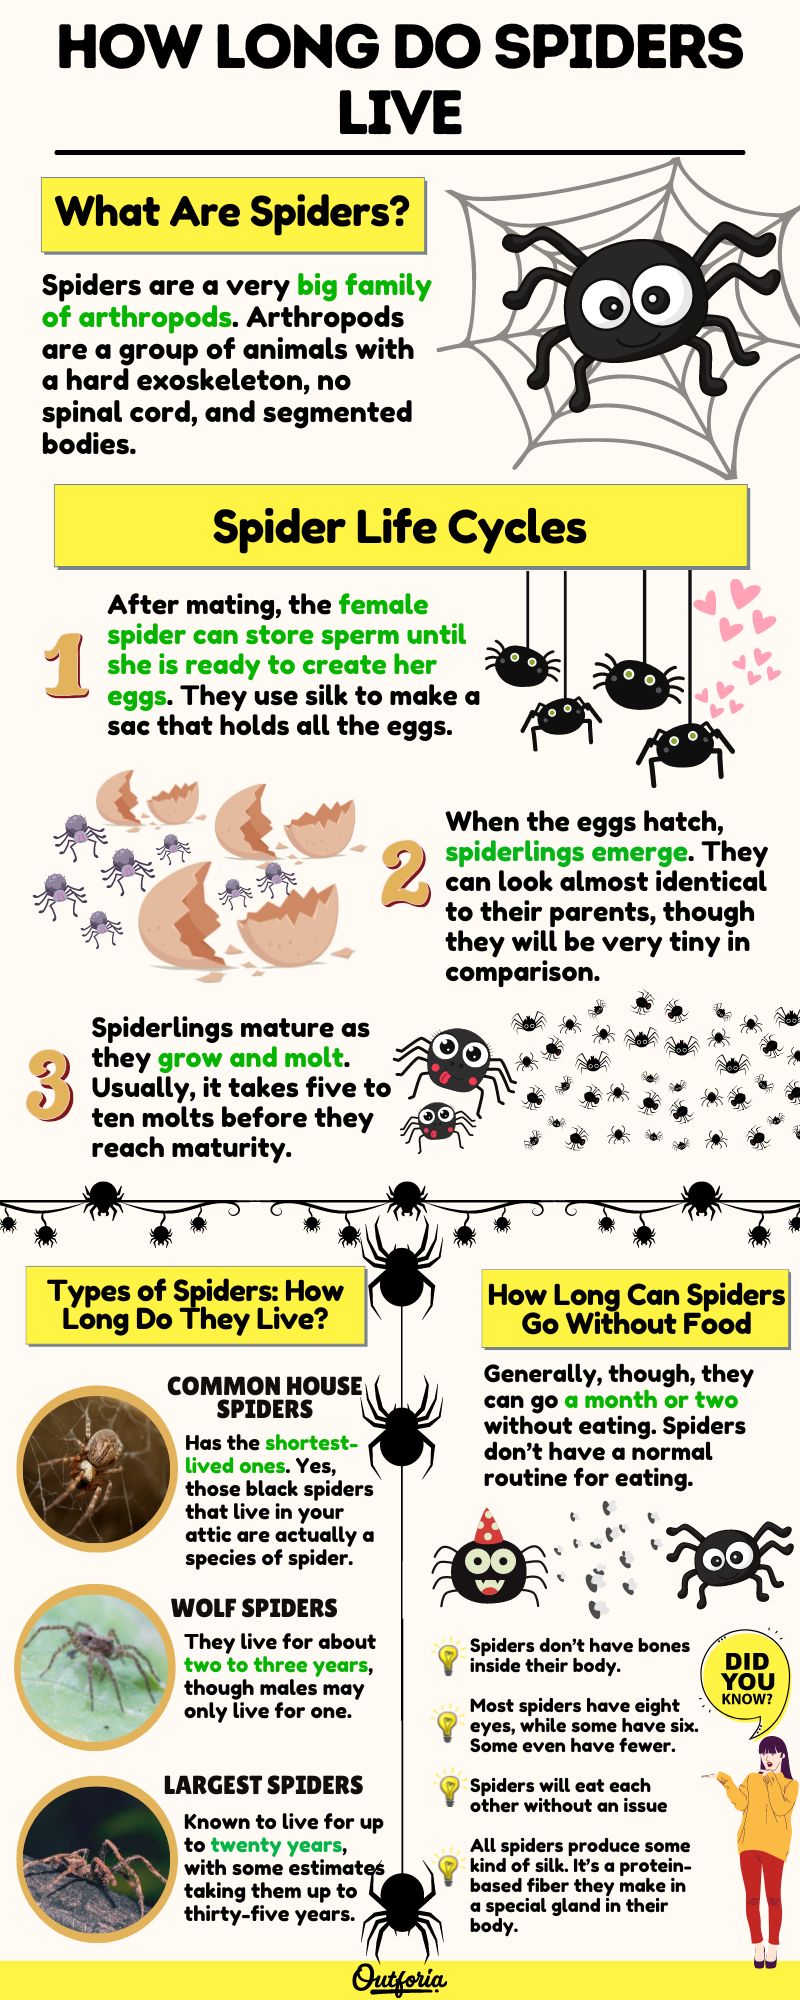 Chart of how long do spiders live complete with facts, pictures, and more